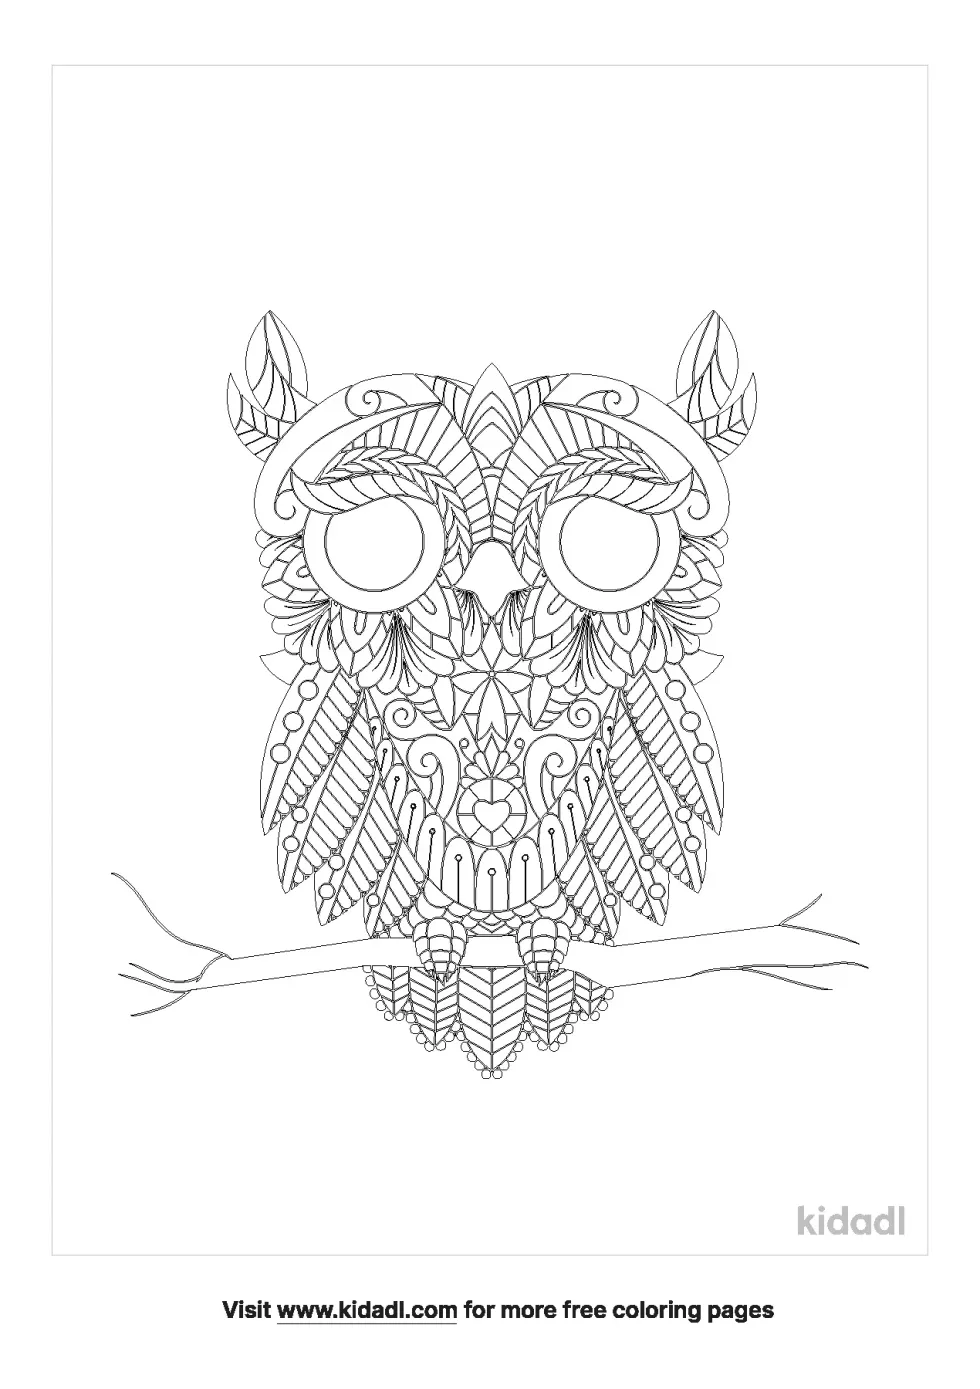 Abstract Owl Coloring Page